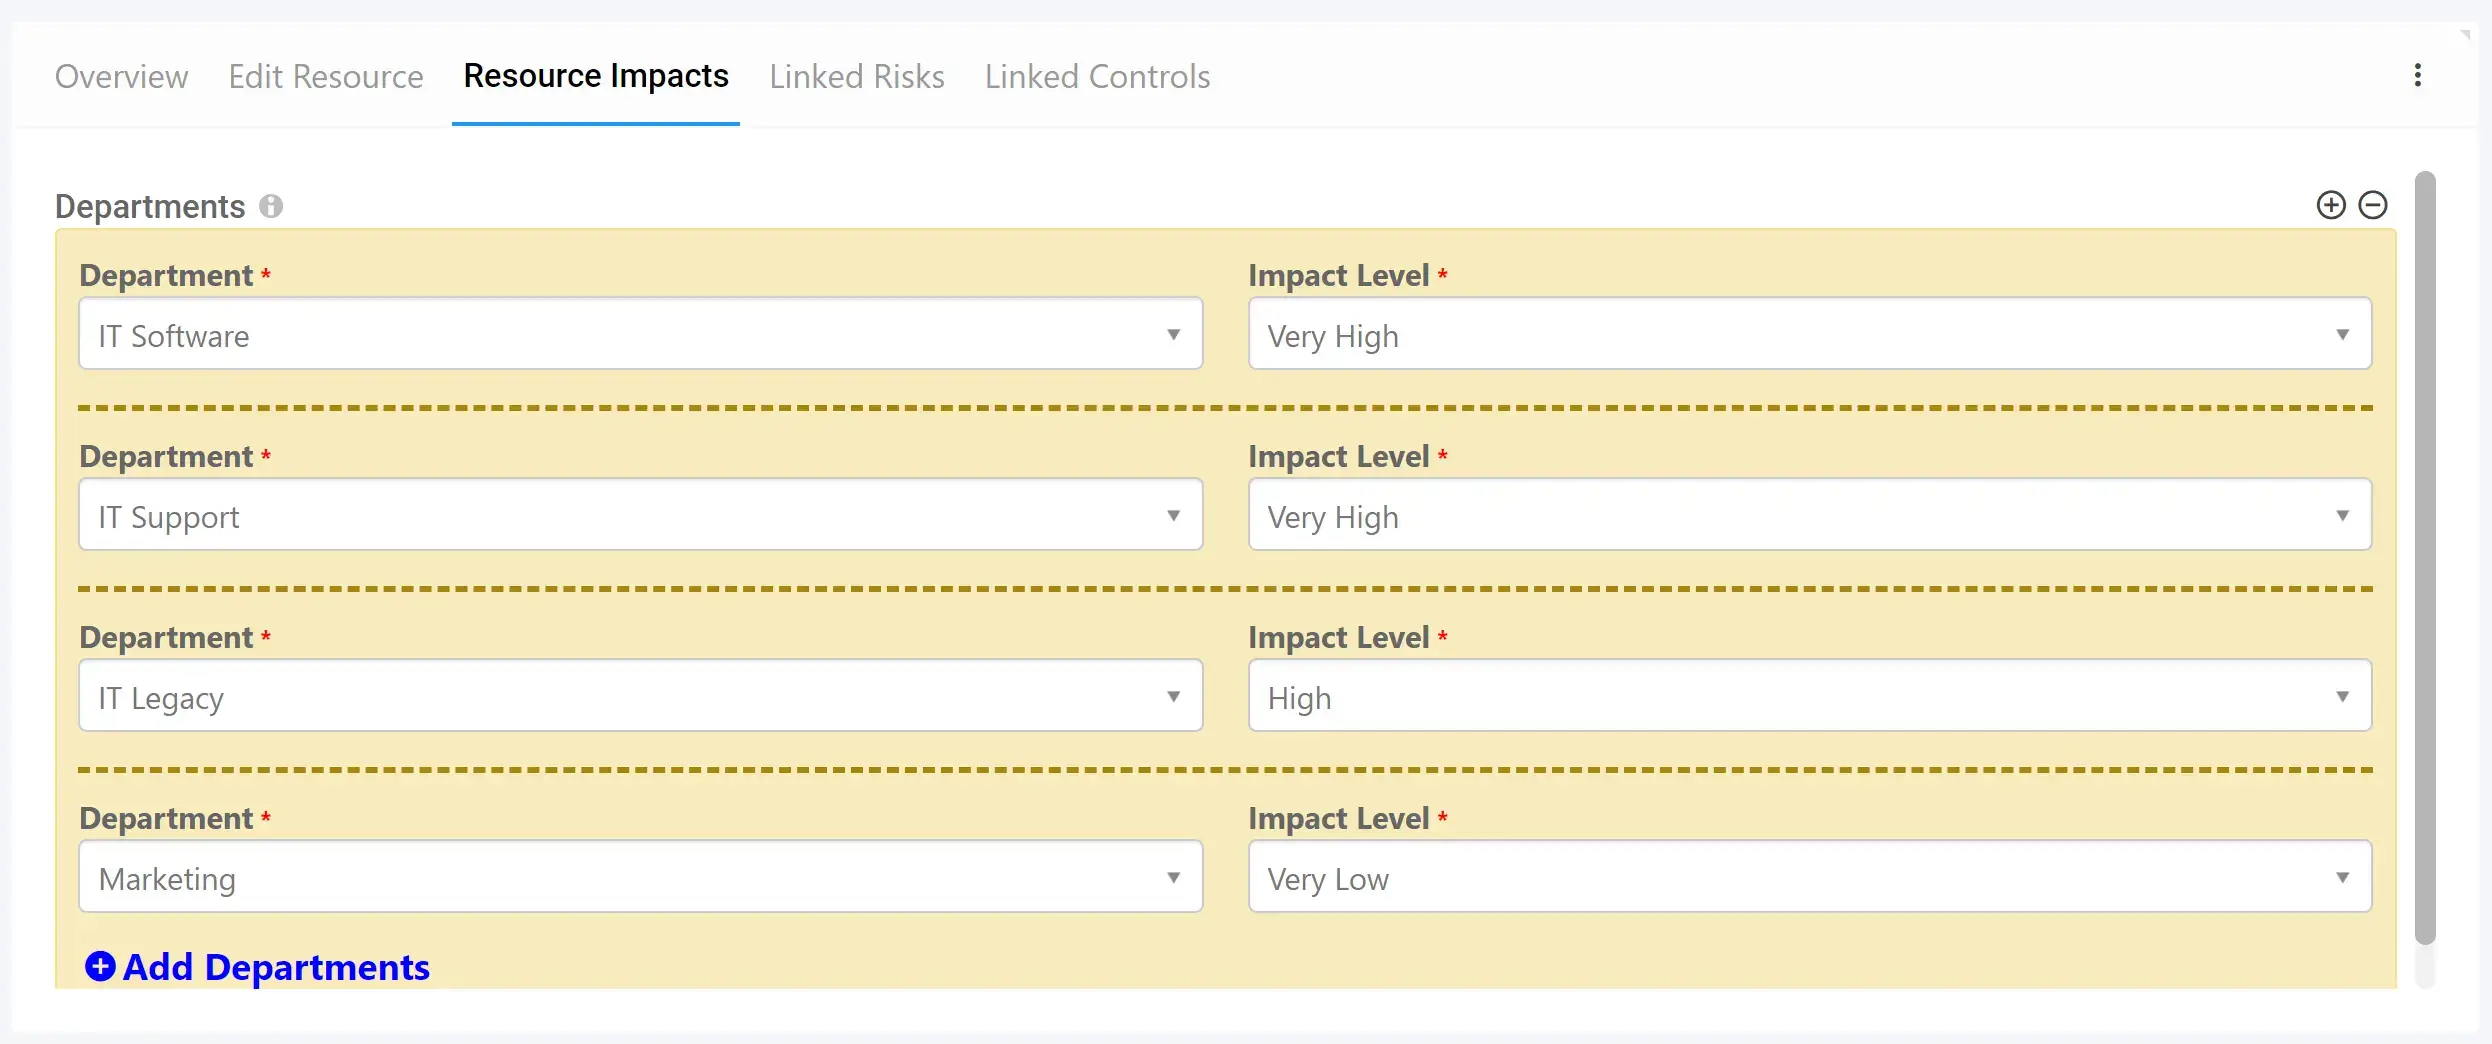 A Screenshot of the Business Continuity Planning module record details with impact assessments for different departments.